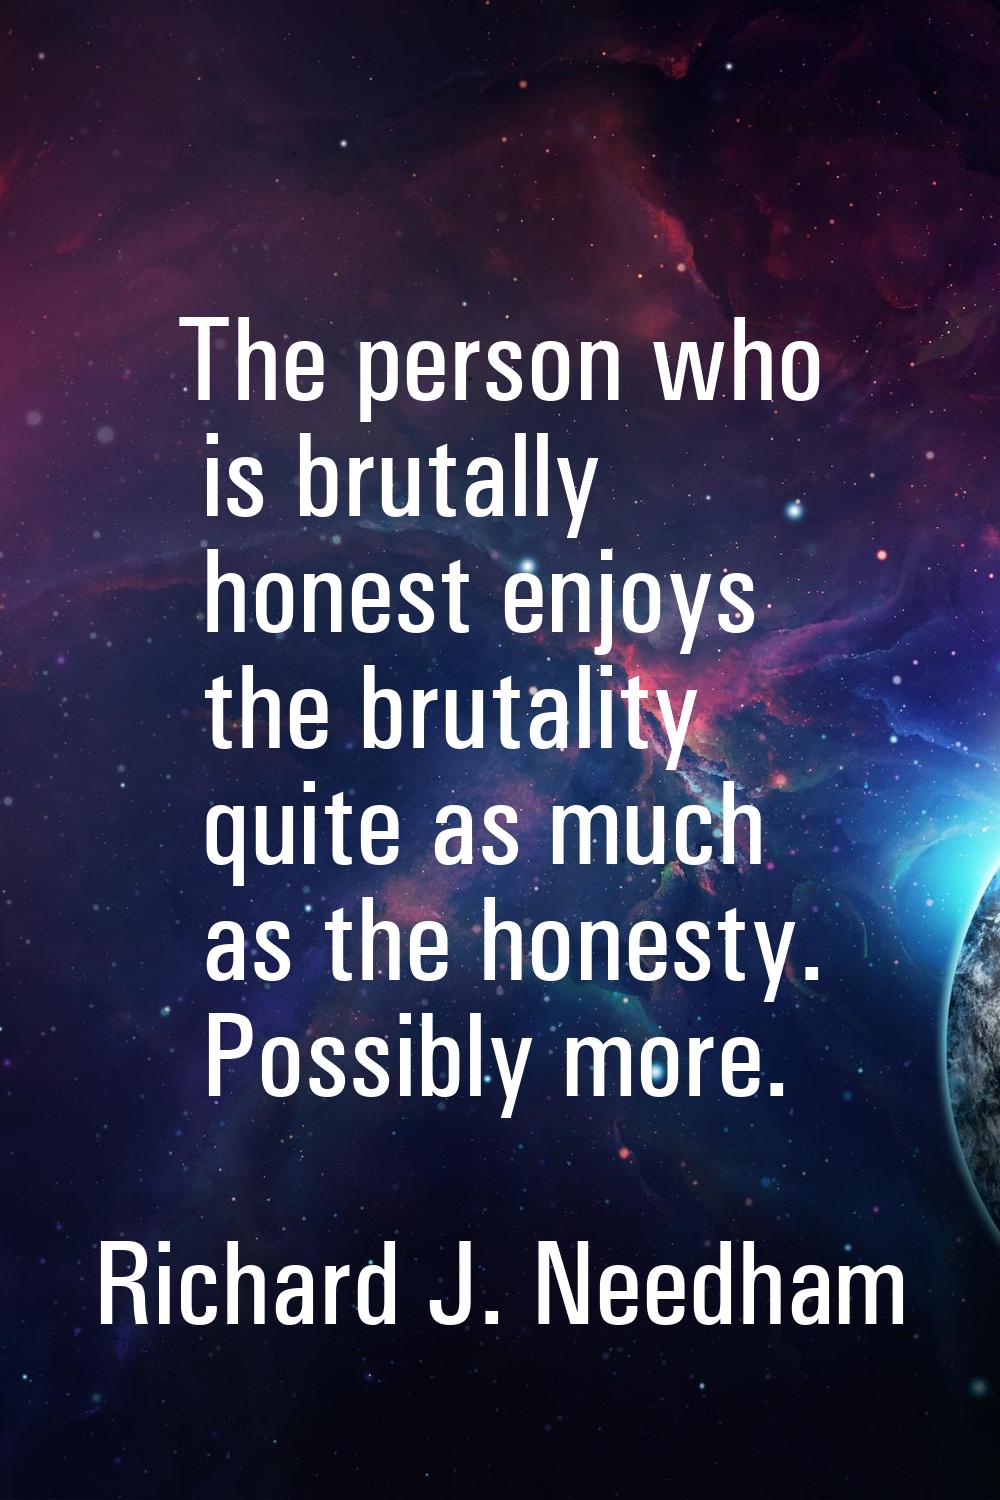 The person who is brutally honest enjoys the brutality quite as much as the honesty. Possibly more.